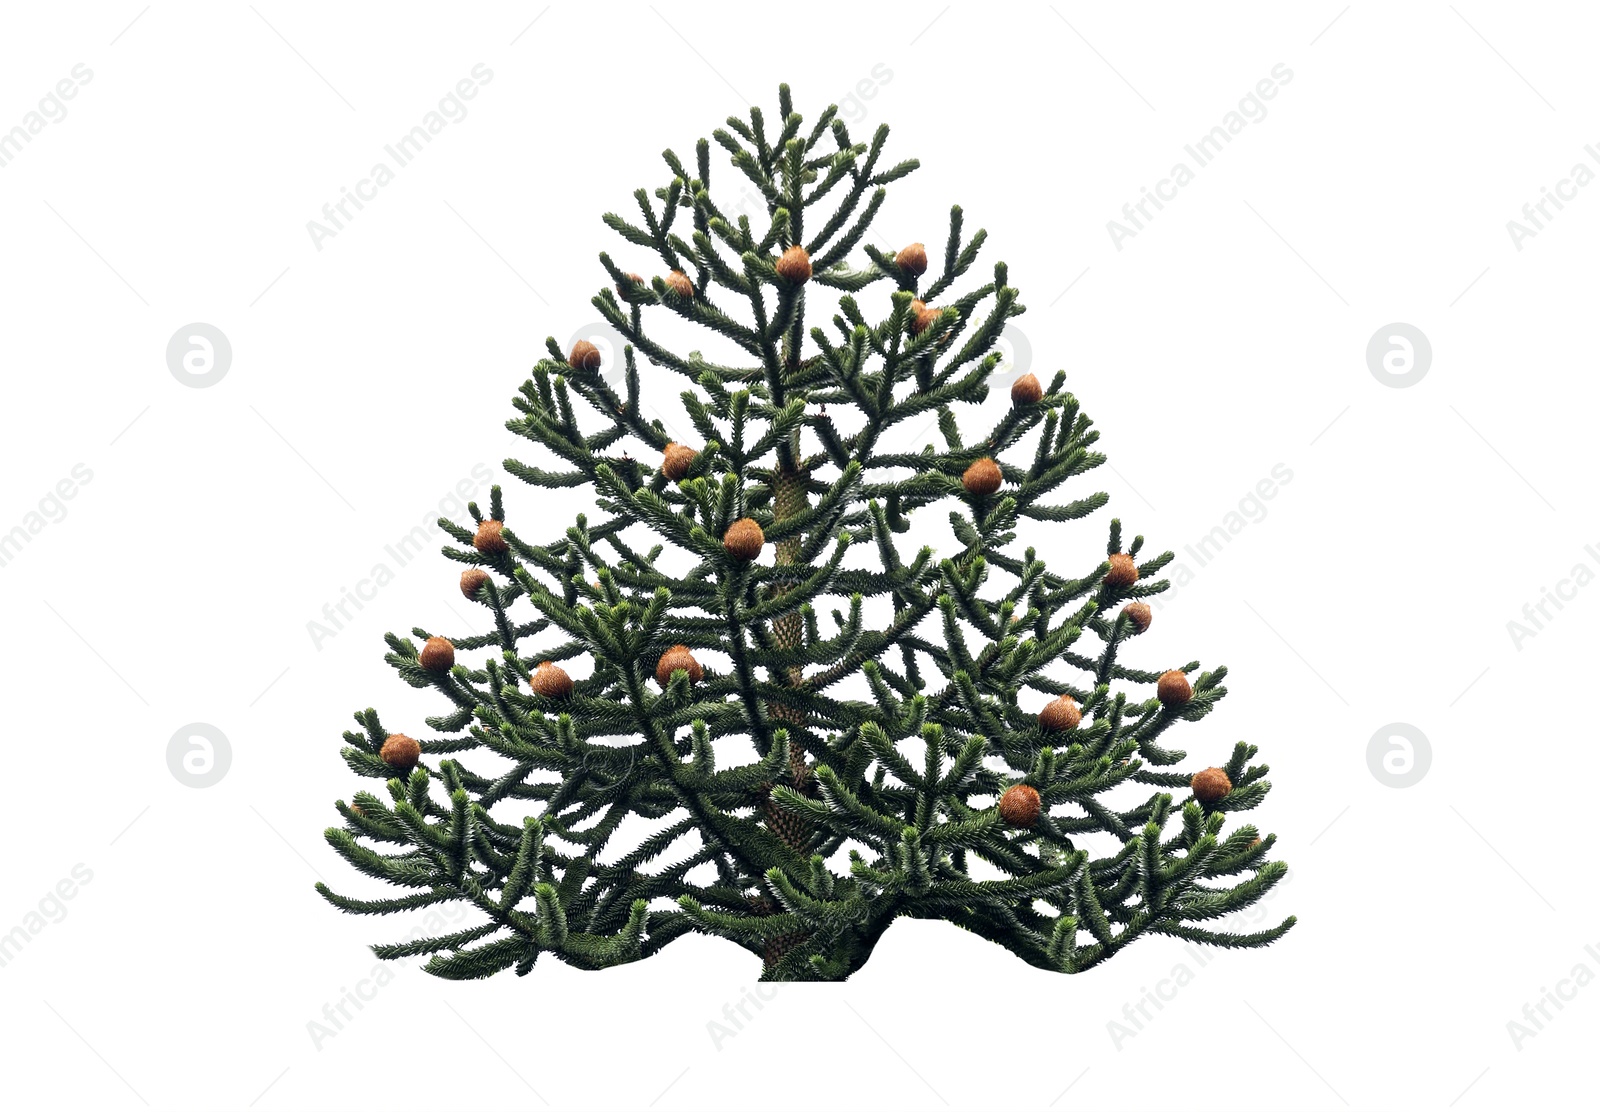 Image of Beautiful fir tree with cones isolated on white